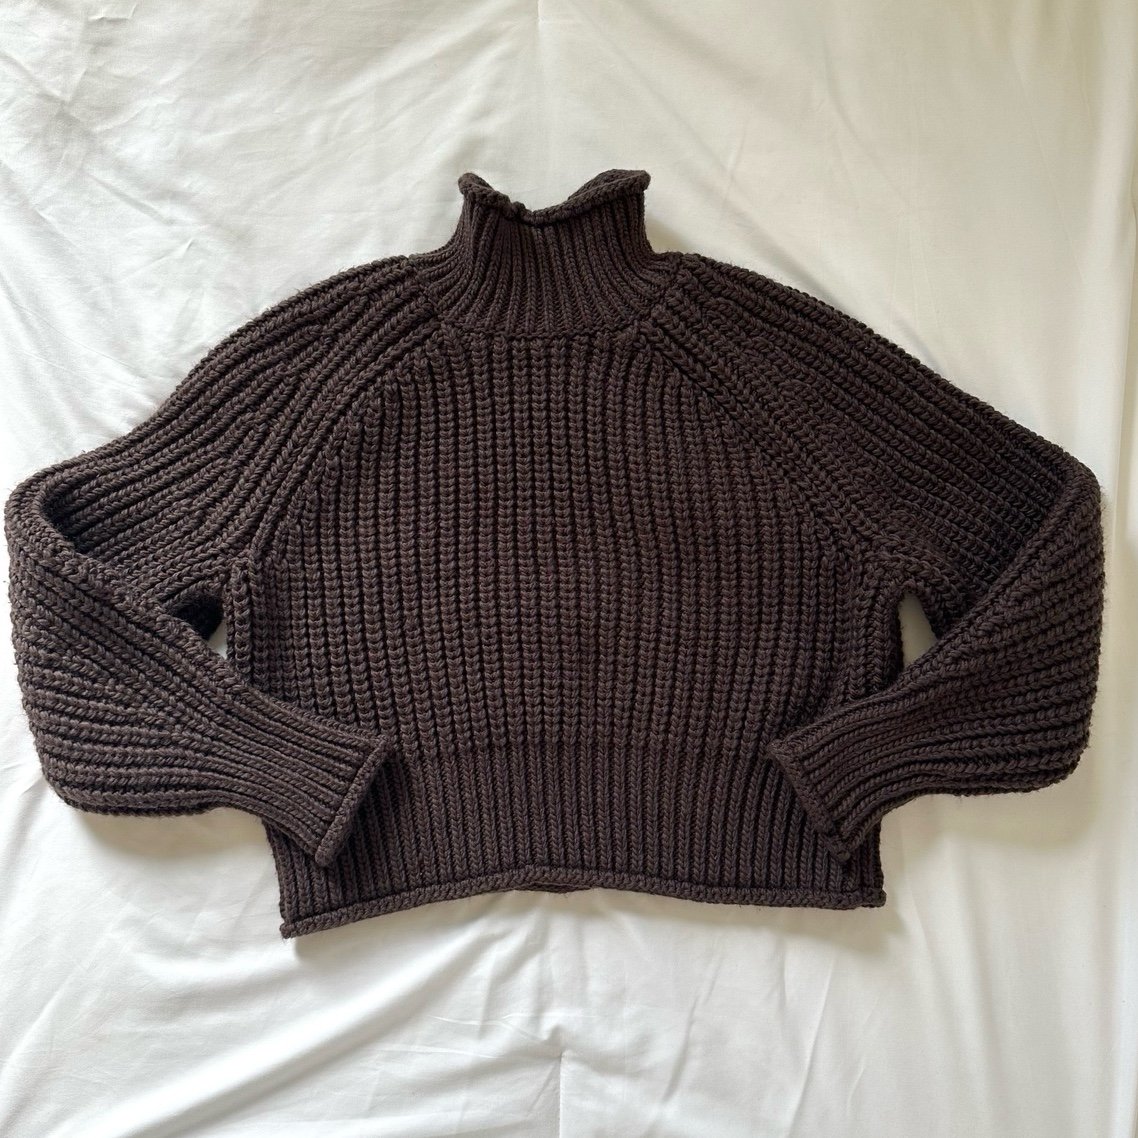 Exclusive H&M Brown Turtleneck Knit Sweater Size Medium fgE299DNN US Outlet